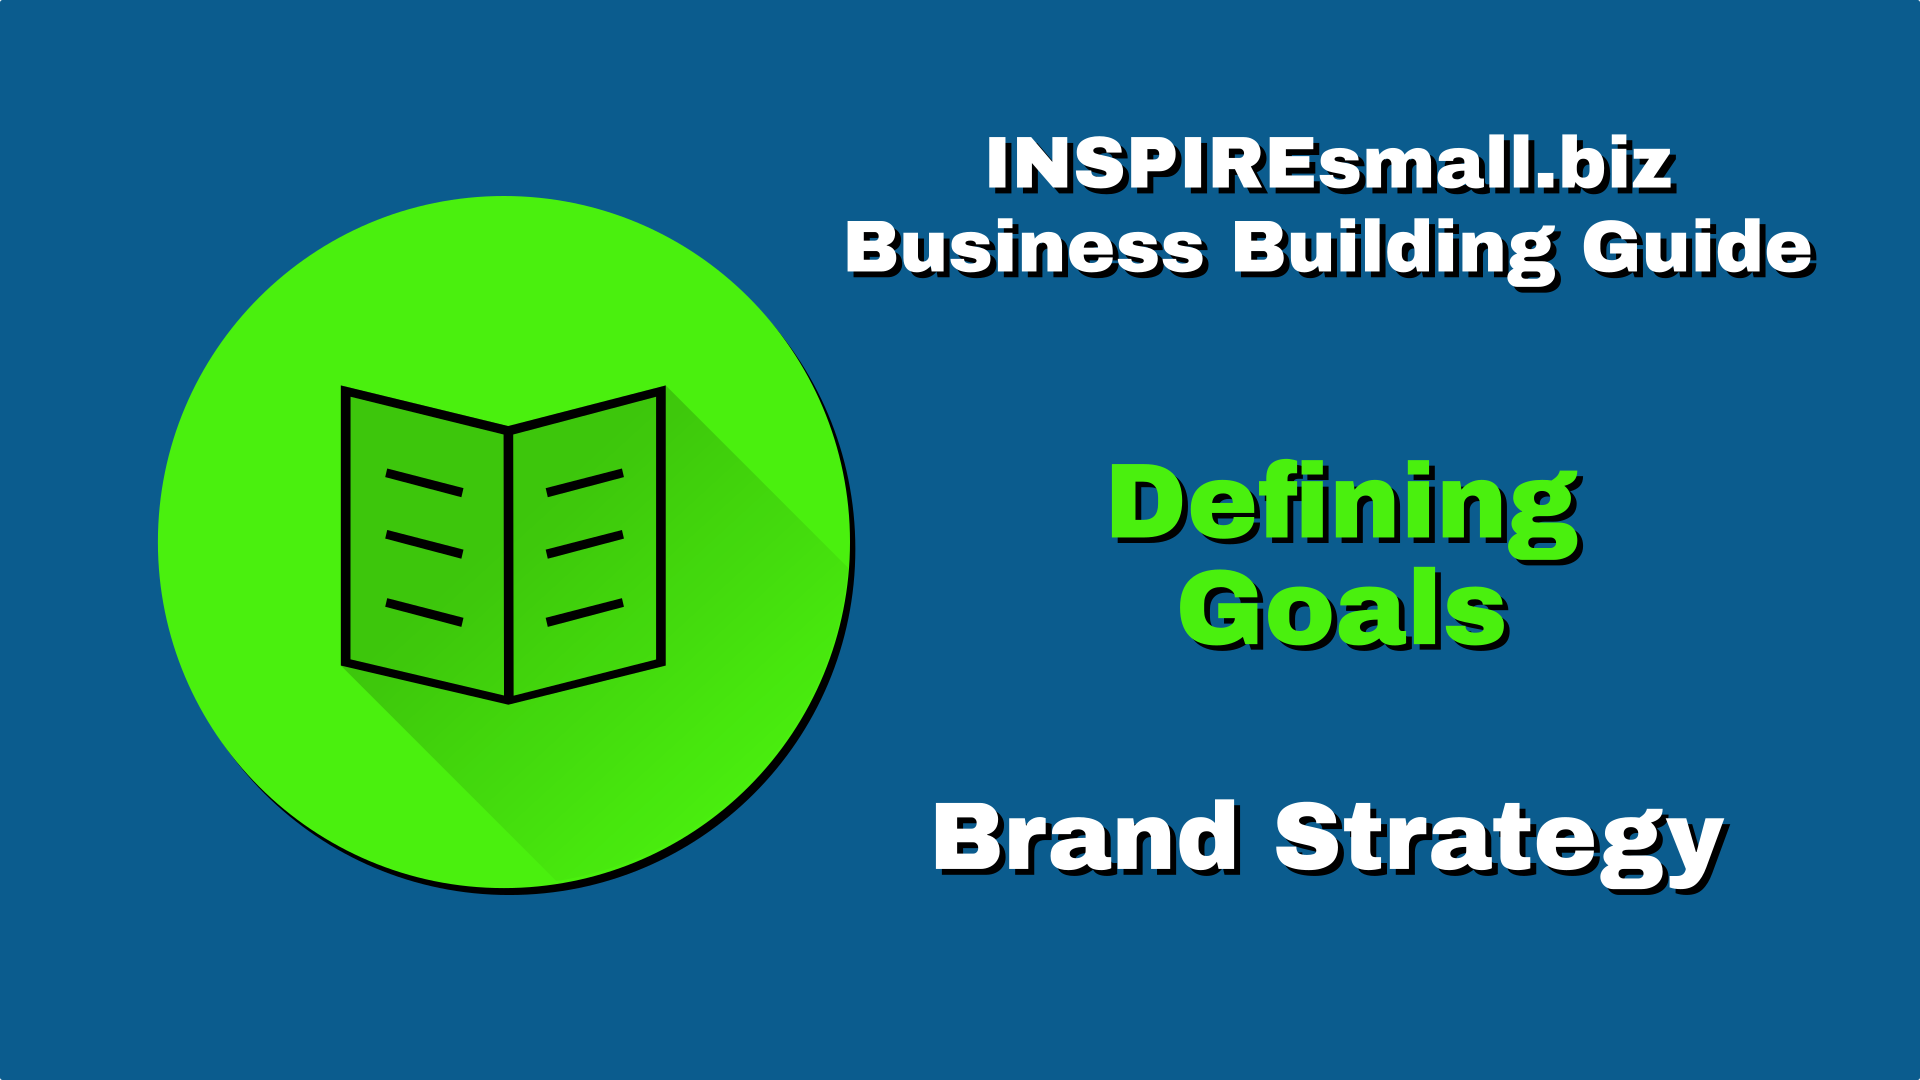 INSPIREsmall.biz Business Building Guide - Brand Strategy Section - Defining Goals